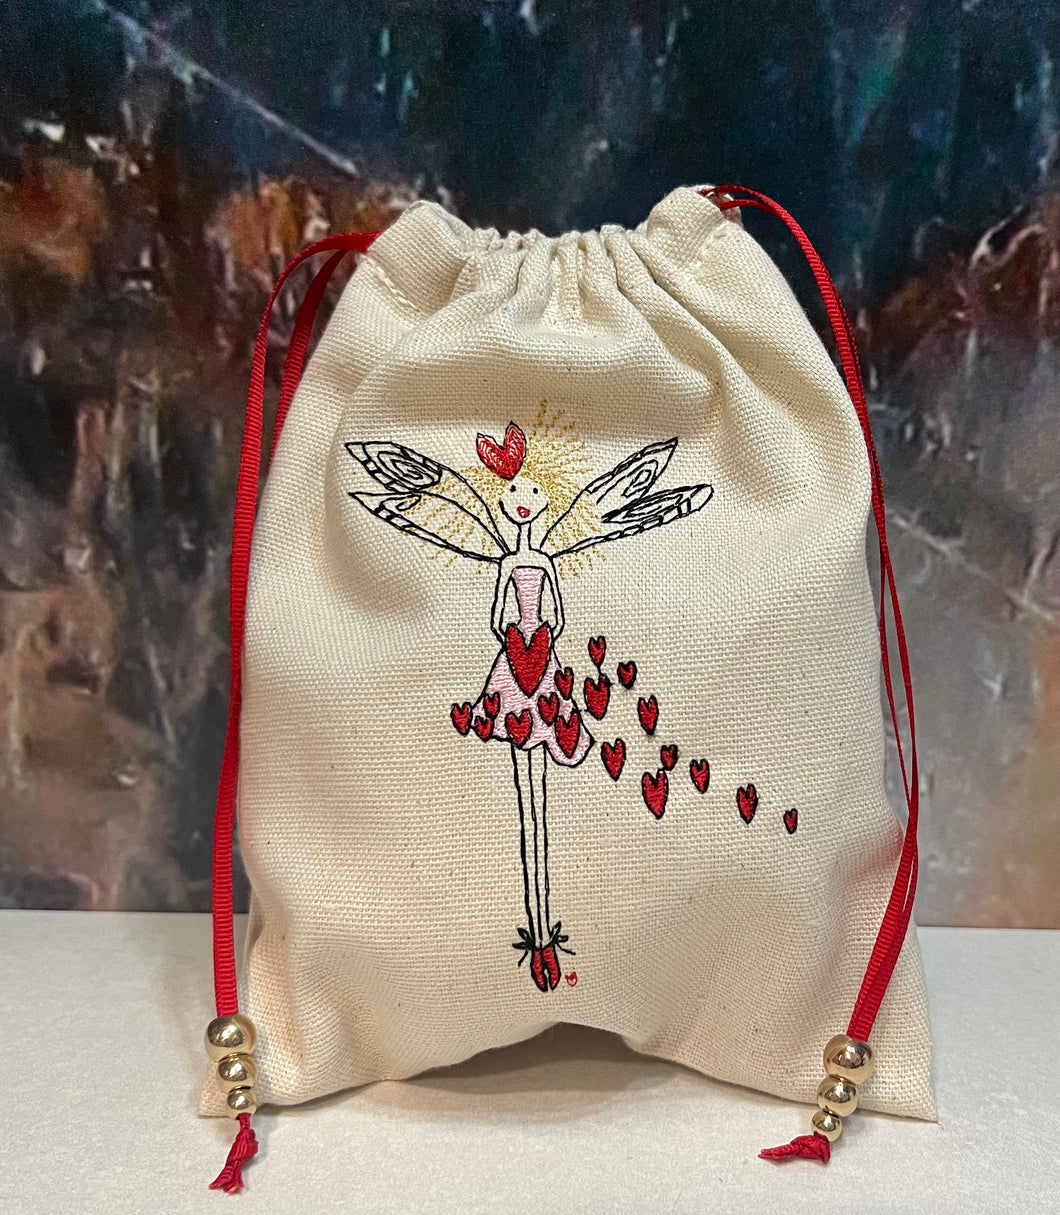 Heart Fairy - SPECIAL PRICE for Valentine's Day!